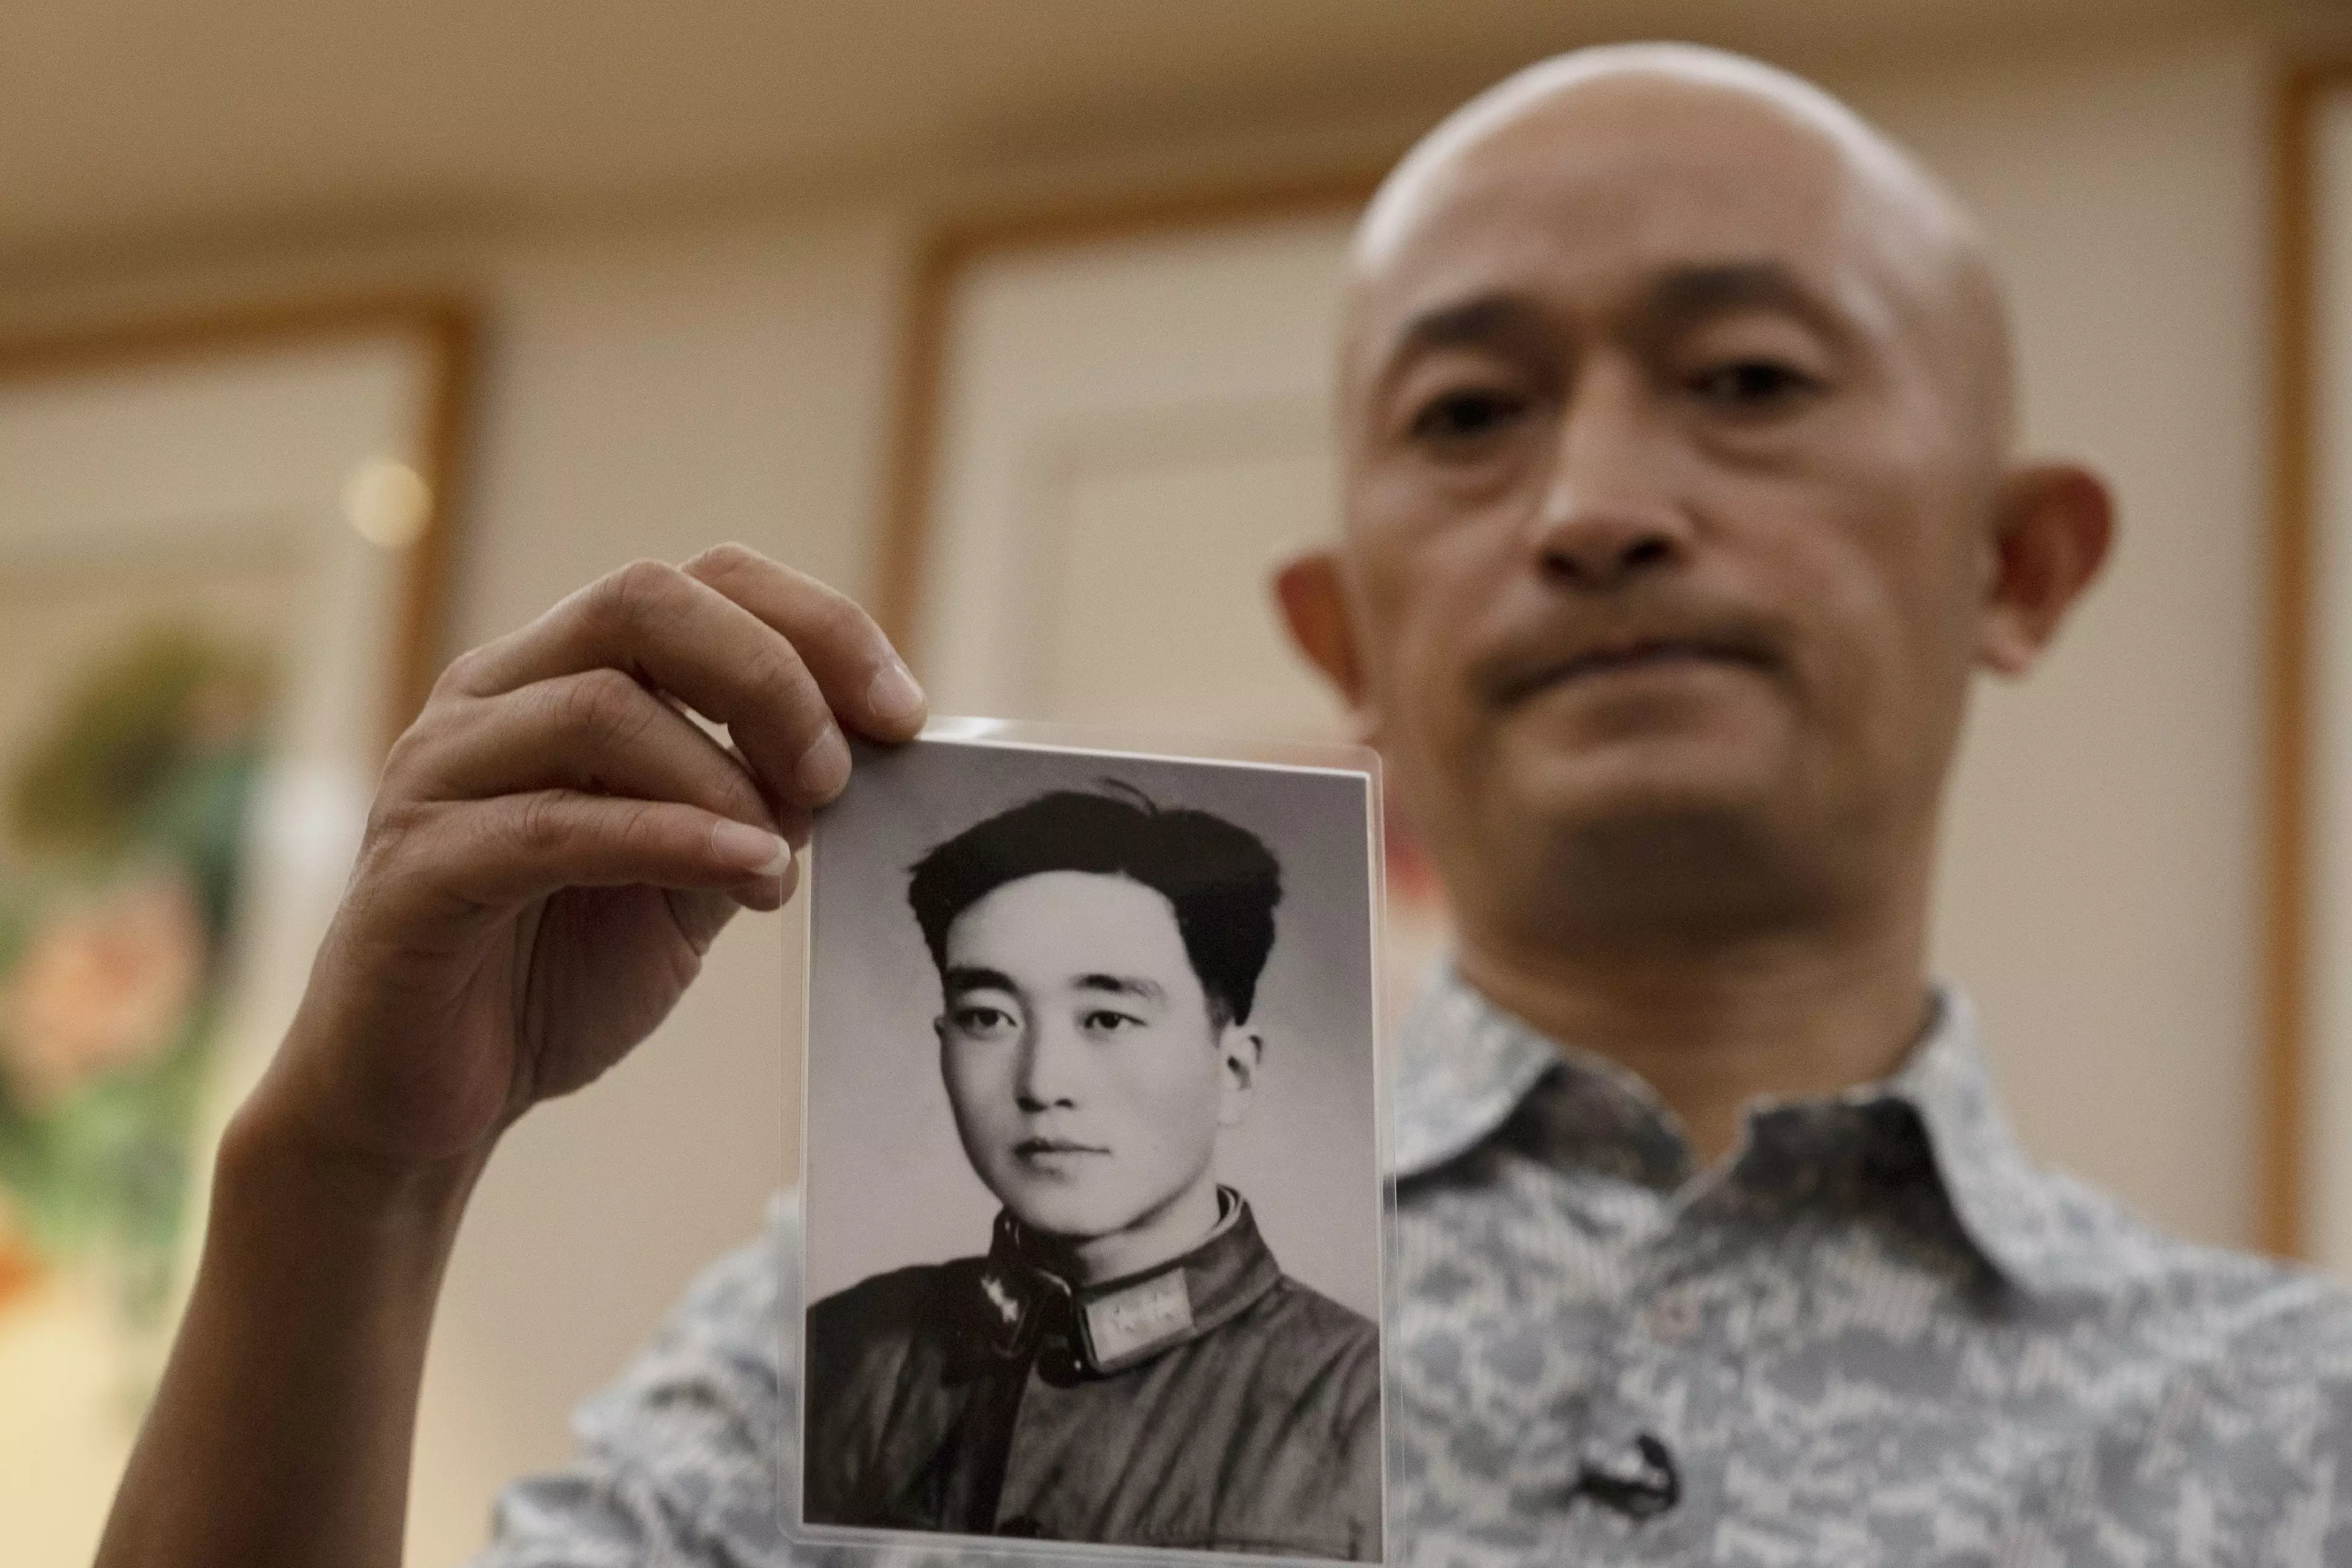 Zhang Hai lost his father to Covid-19; he's pictured holding a picture of his dad as a young man.